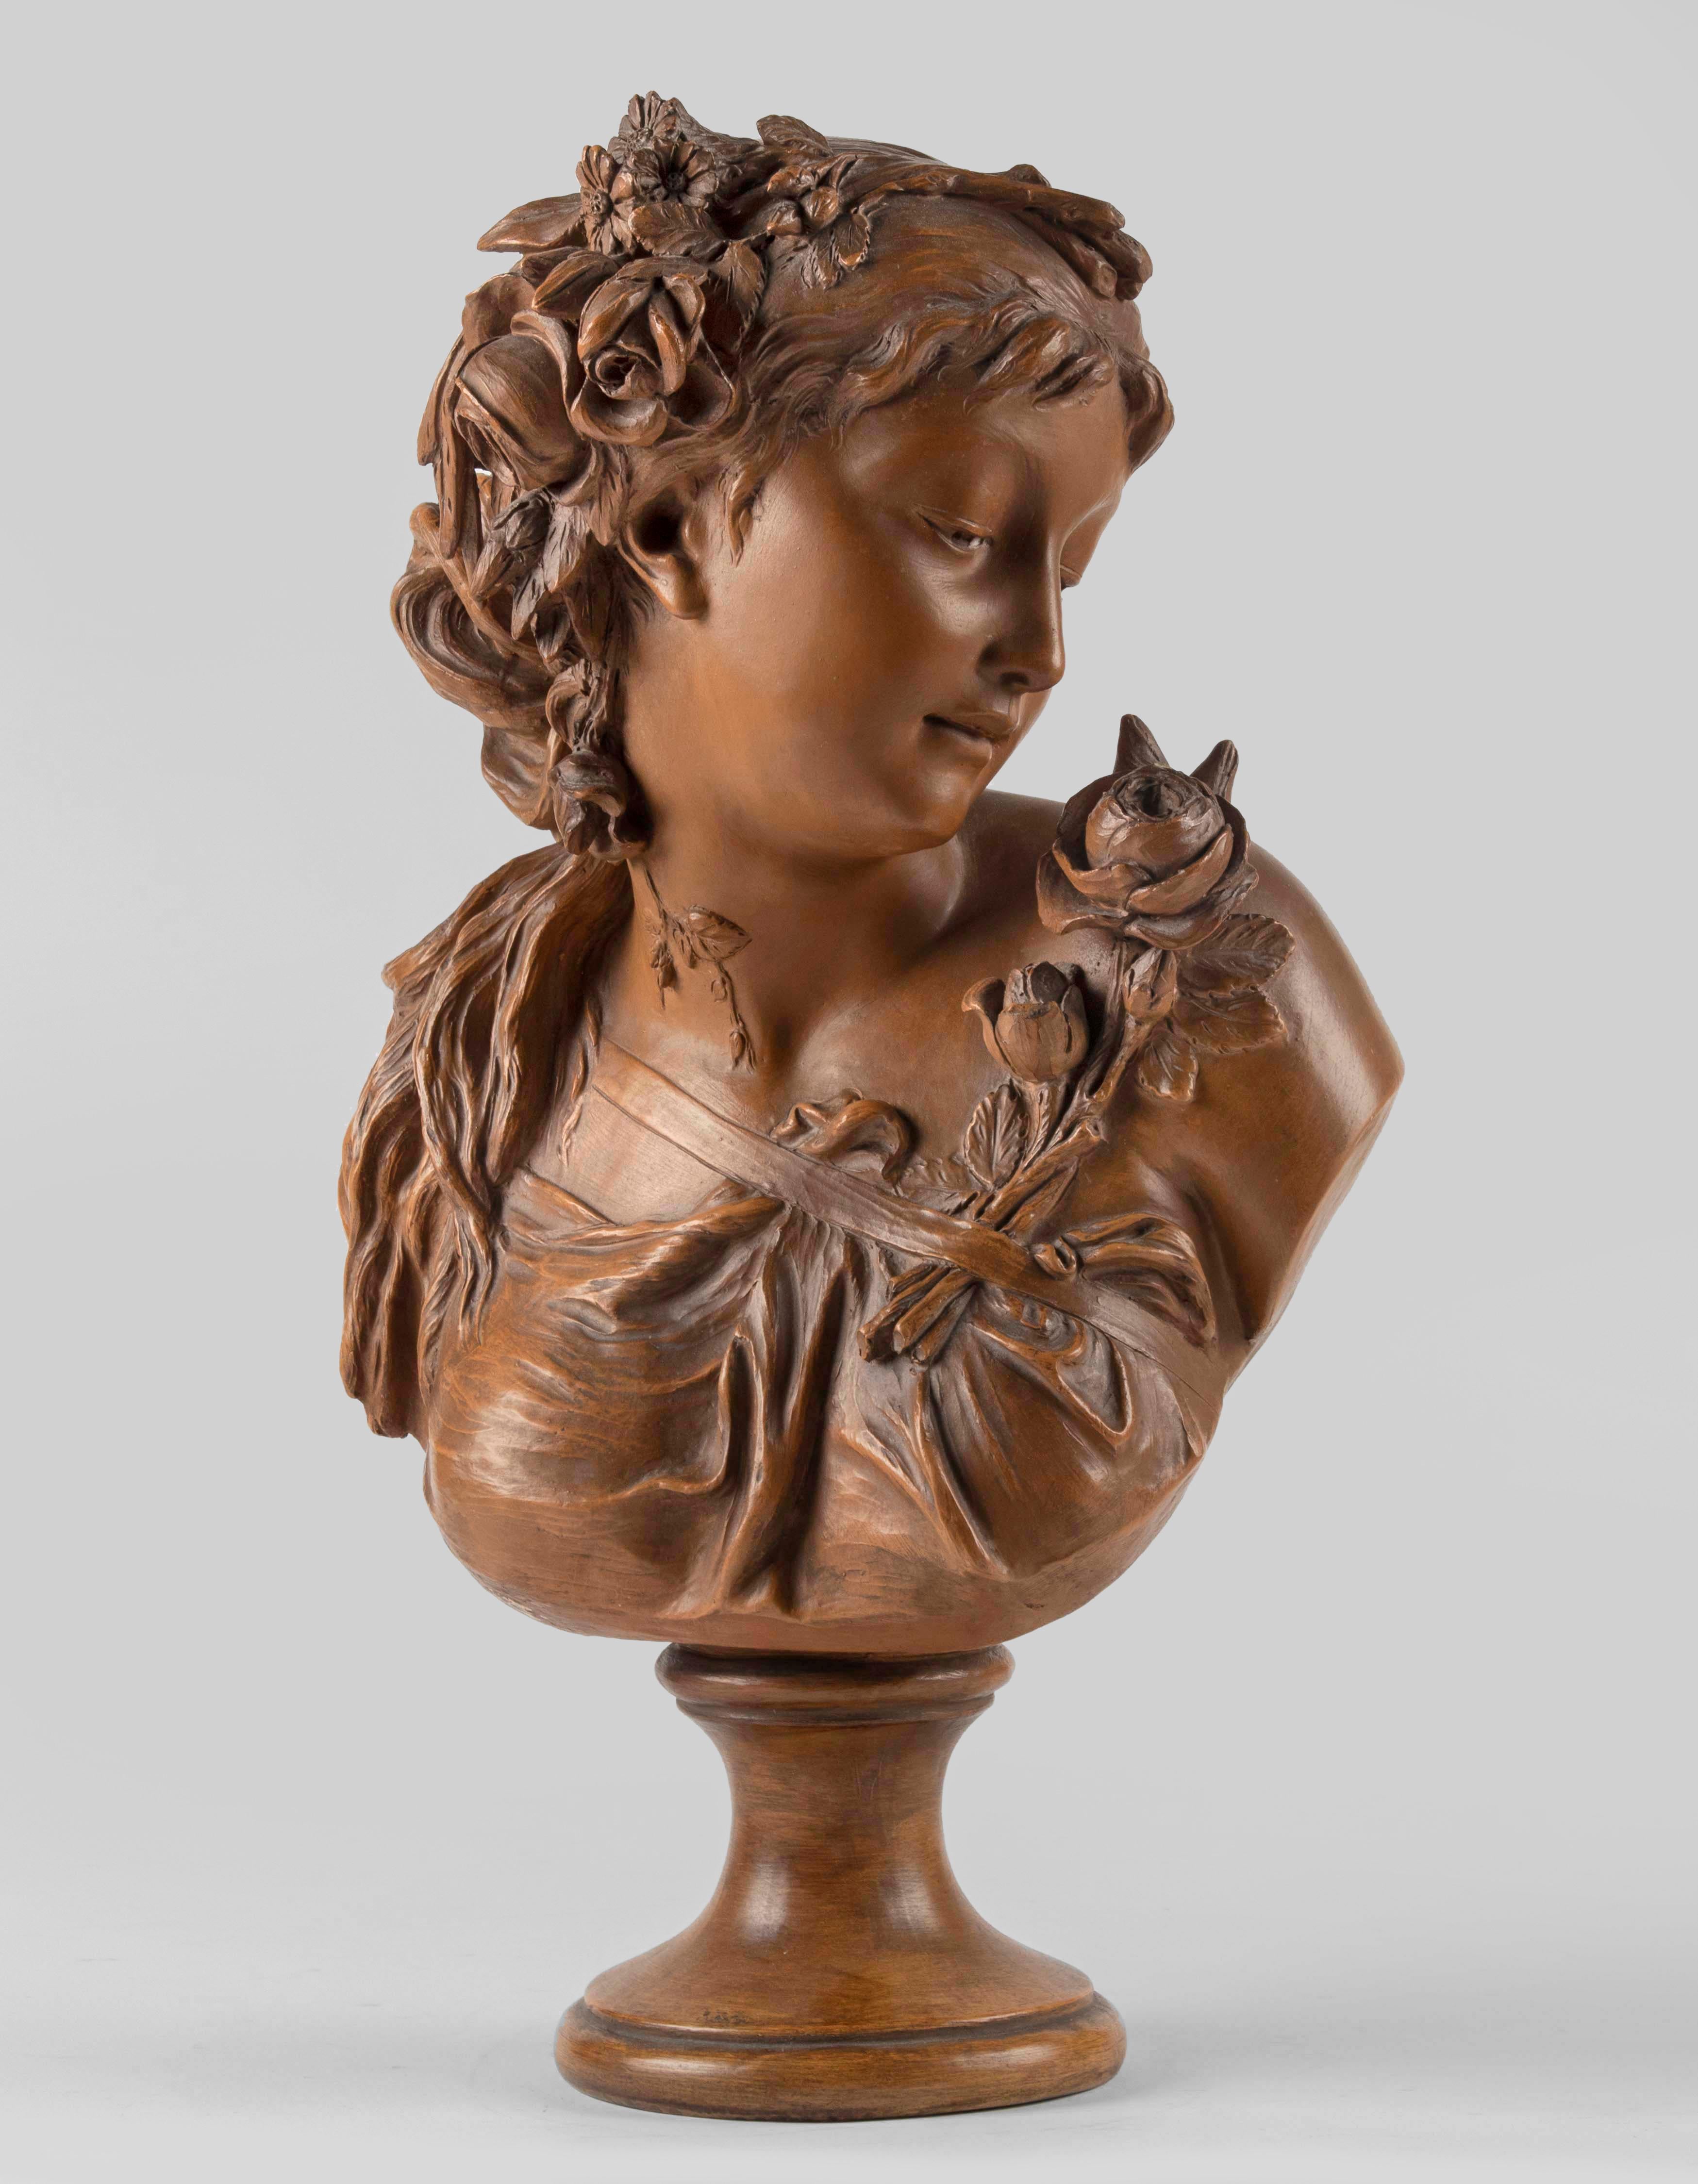 
A fine quality sculpture in terracotta from late Romanticism period. It has a rich ocher-brown patina. Beautiful and very attractive bust with very fine chiselure. Talented sculpting work, combined with a strong ability to interpret. Notice the